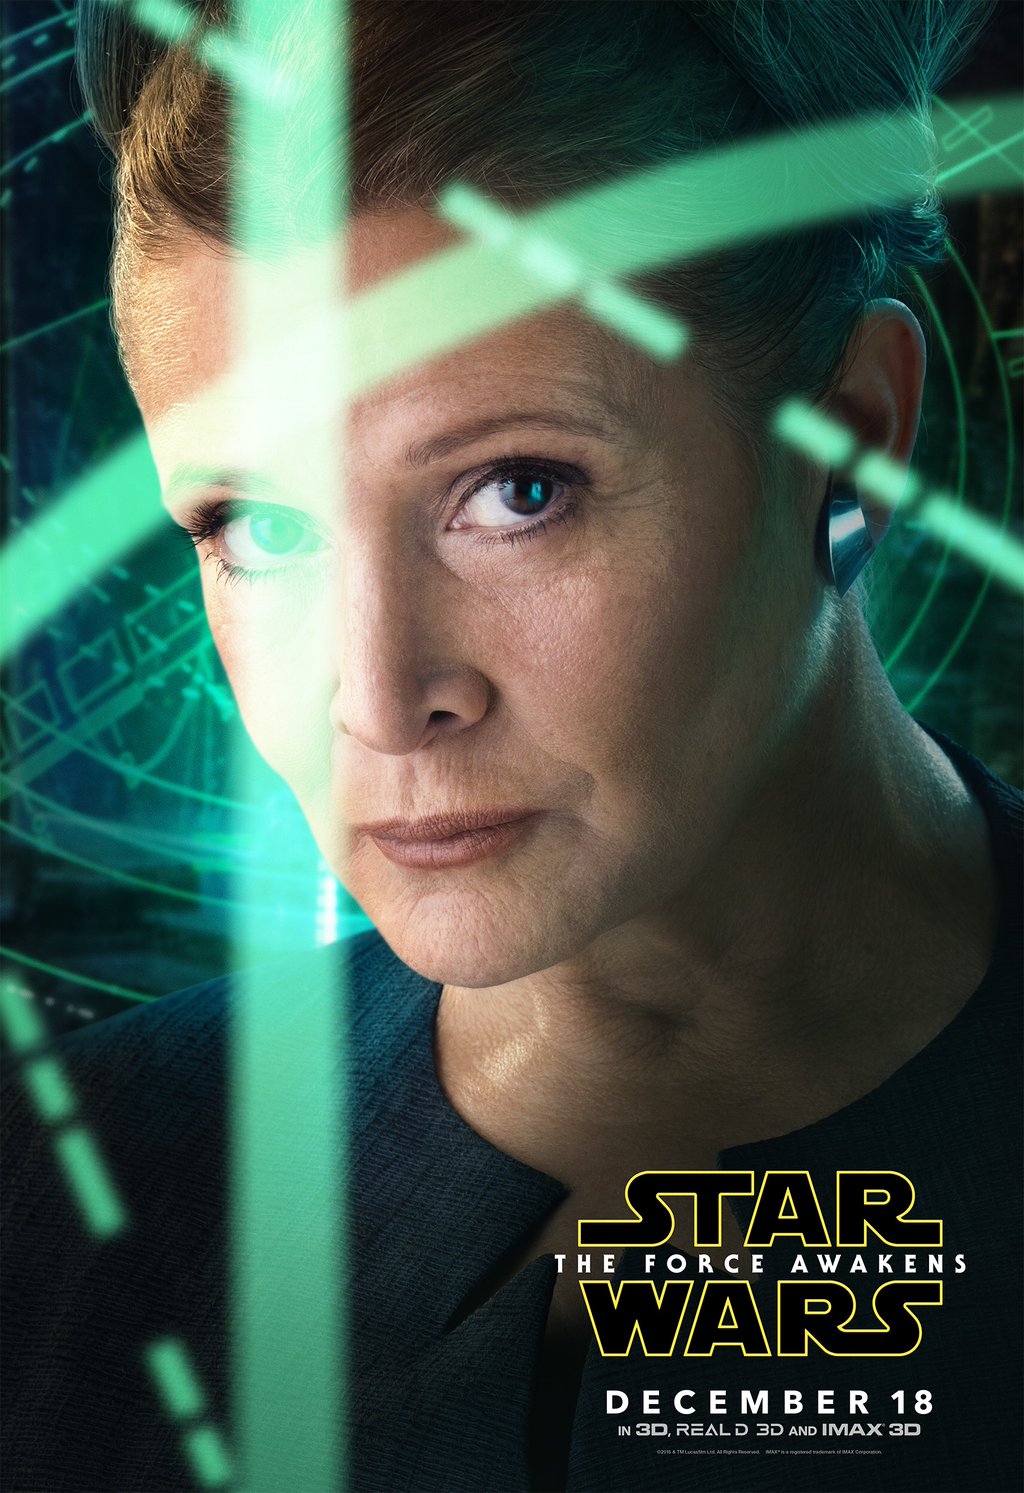 Leia Organa Carrie Fisher Star Wars The Force Awakens movie poster